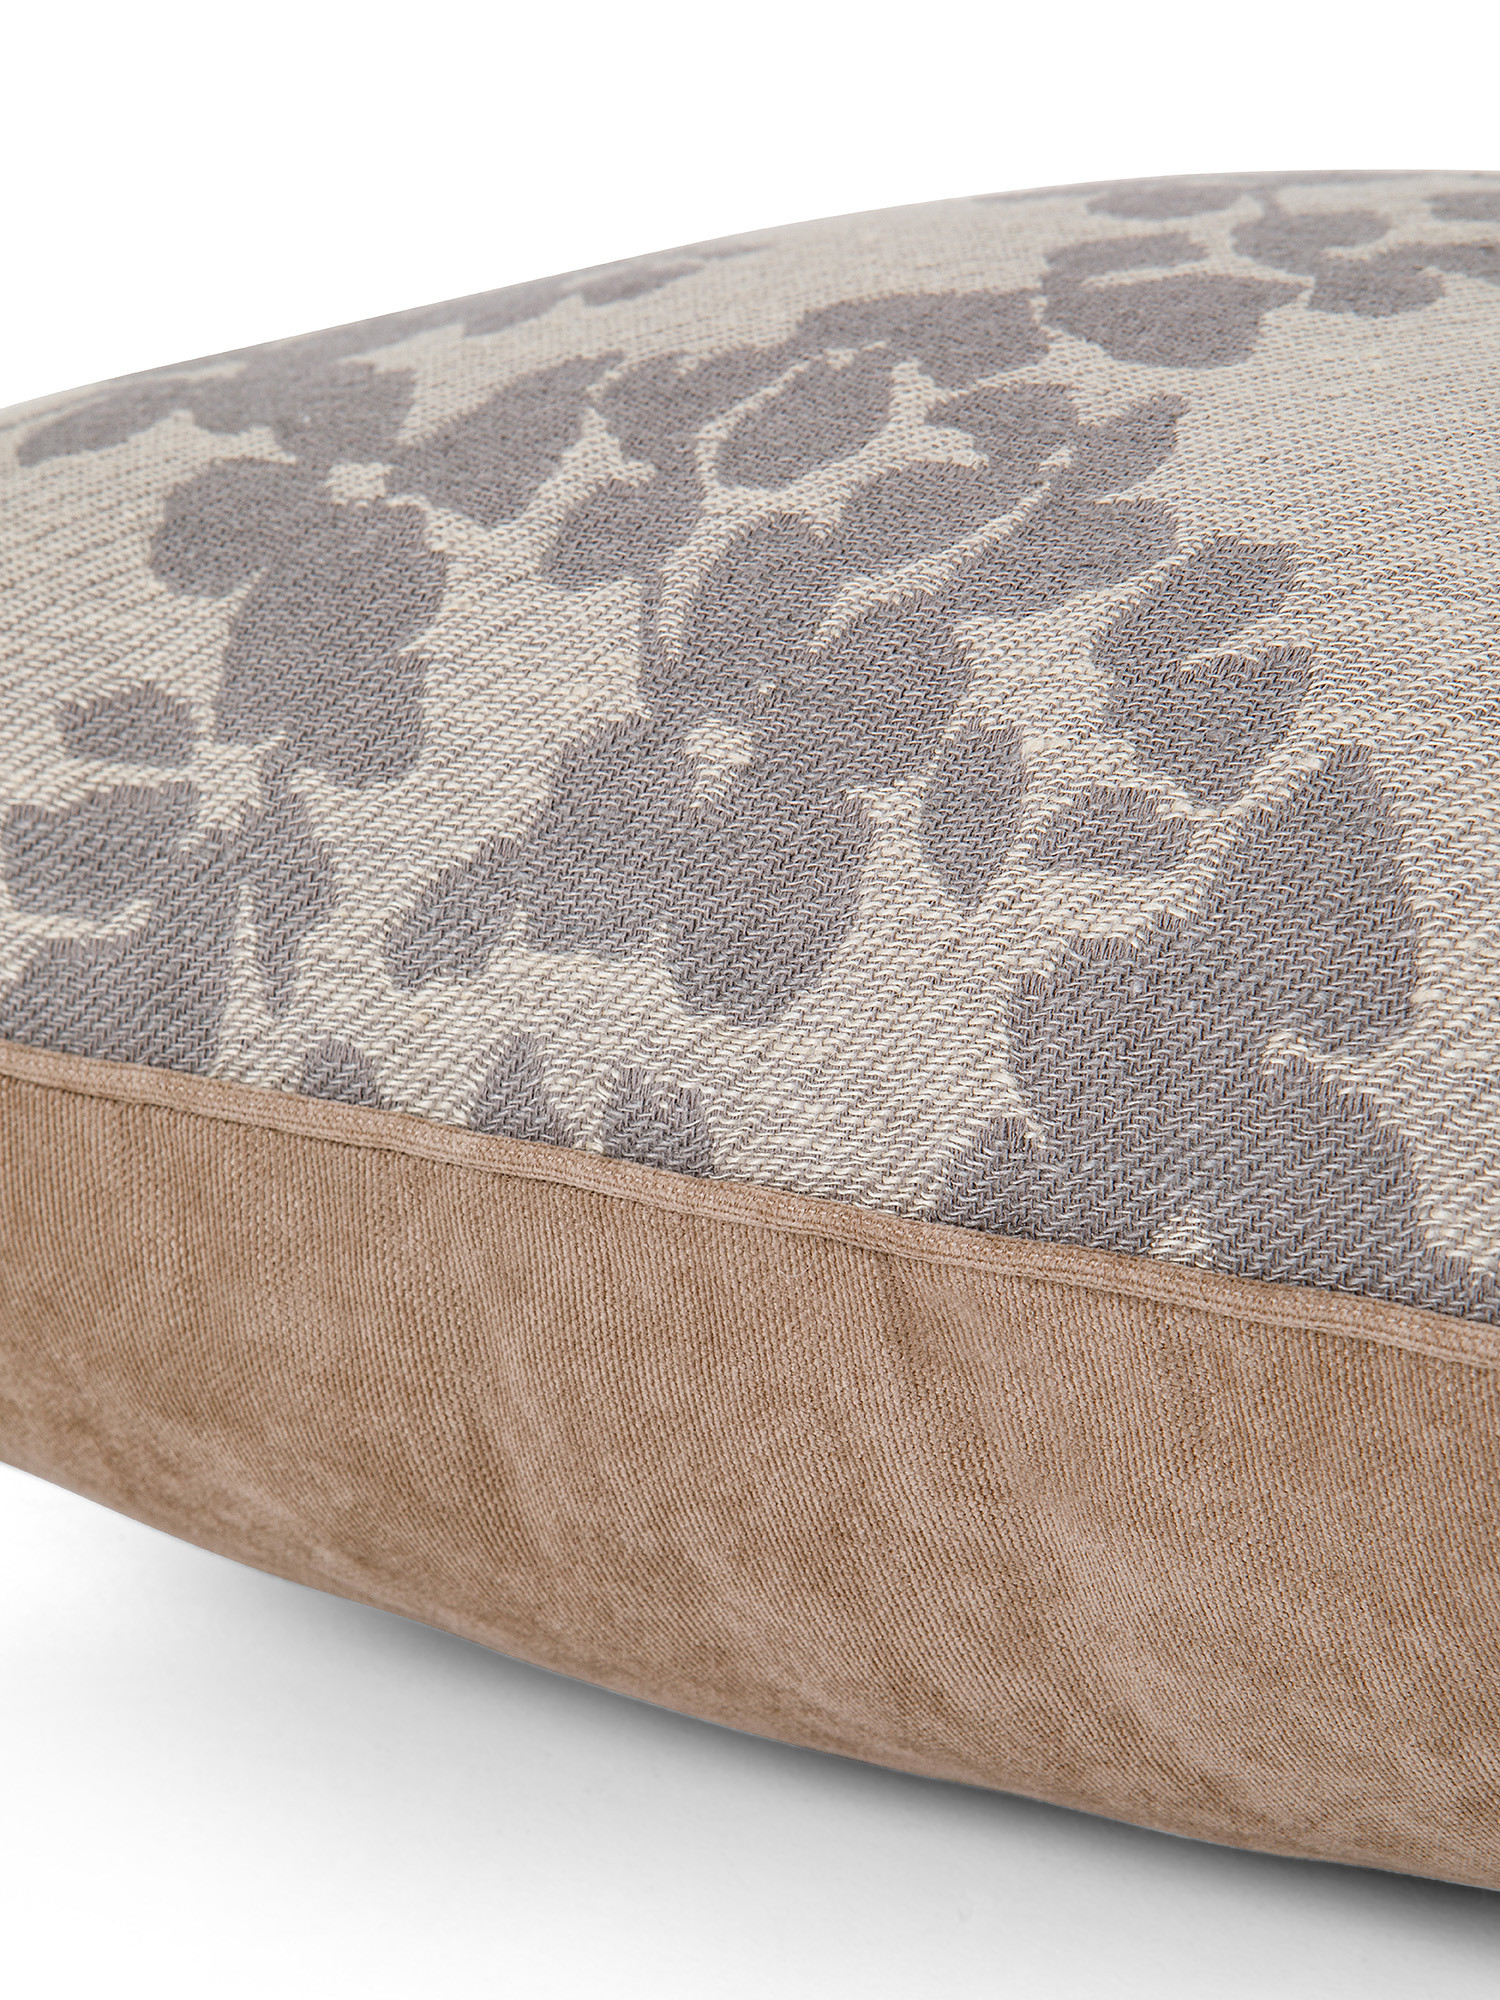 Linen and cotton jacquard cushion with floral pattern 45x45cm, Grey, large image number 2